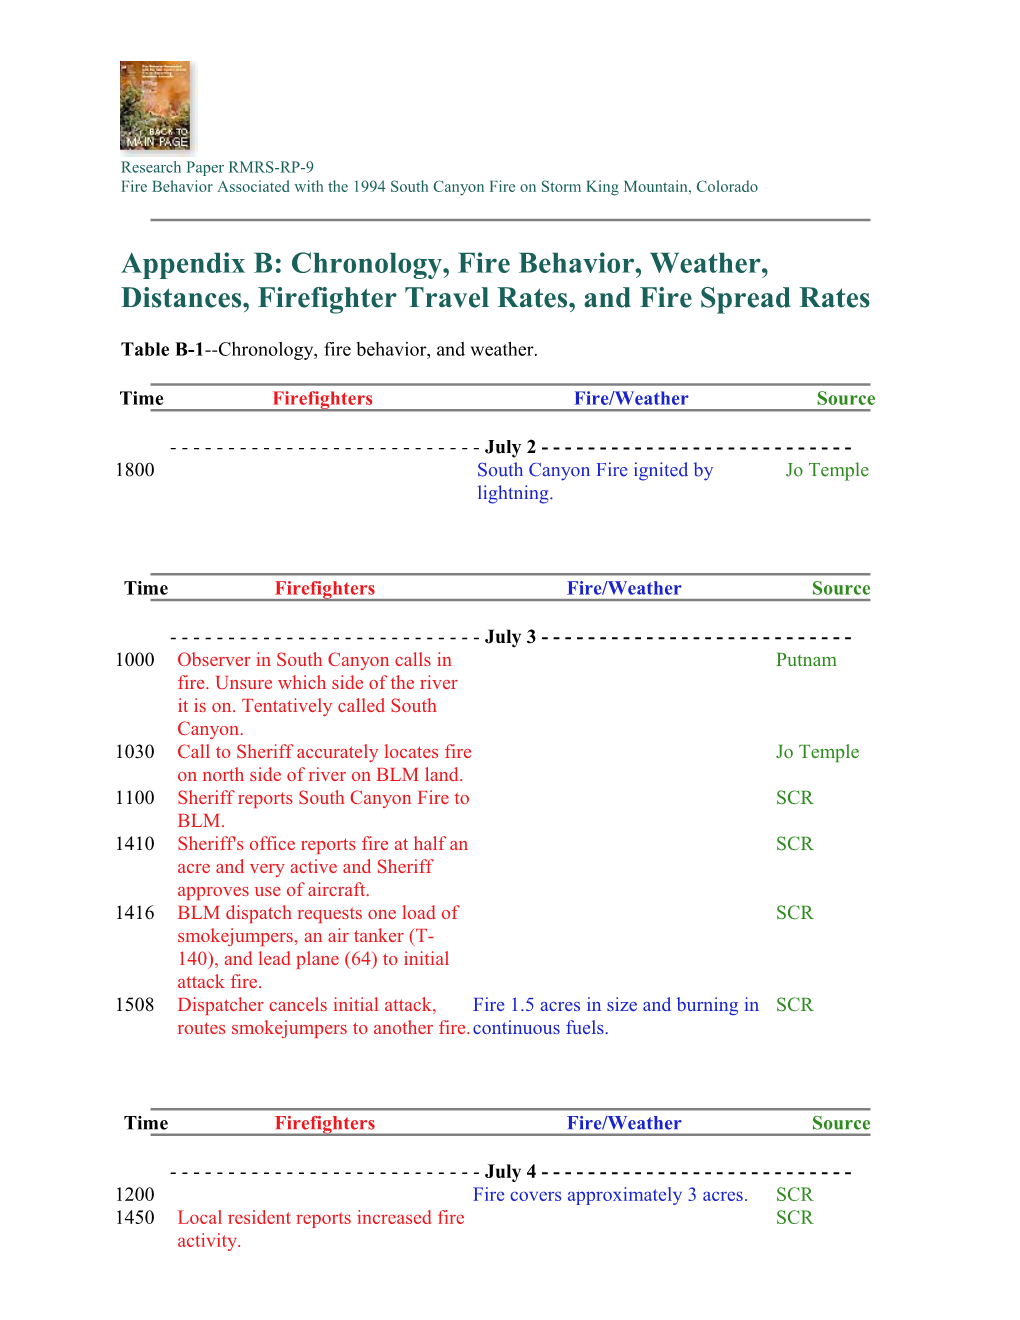 Appendix B: Chronology, Fire Behavior, Weather, Distances, Firefighter Travel Rates, And